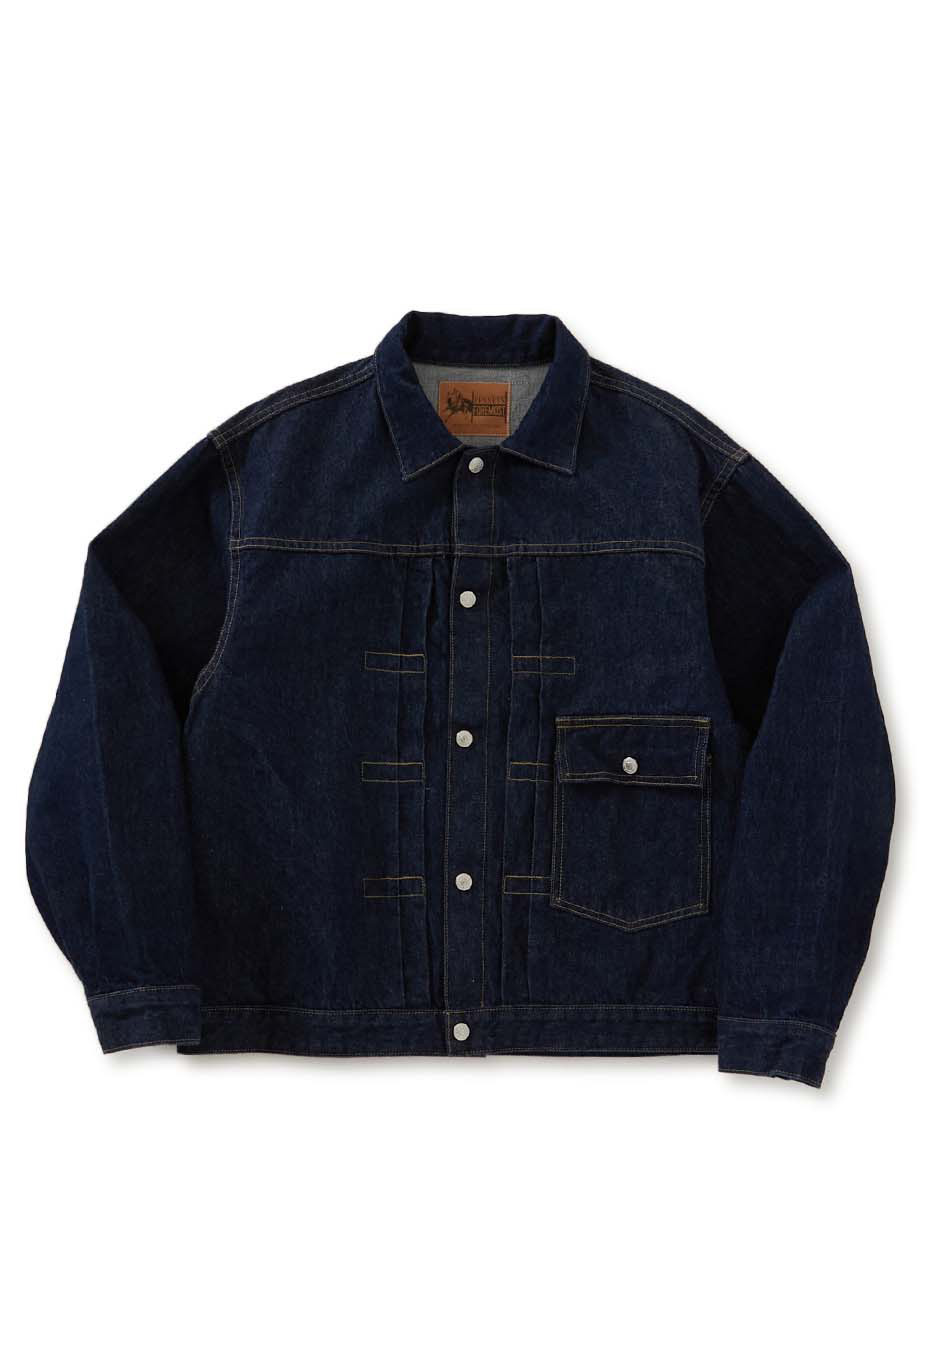 FOREMOST pleated jacket 2nd /pf23f001